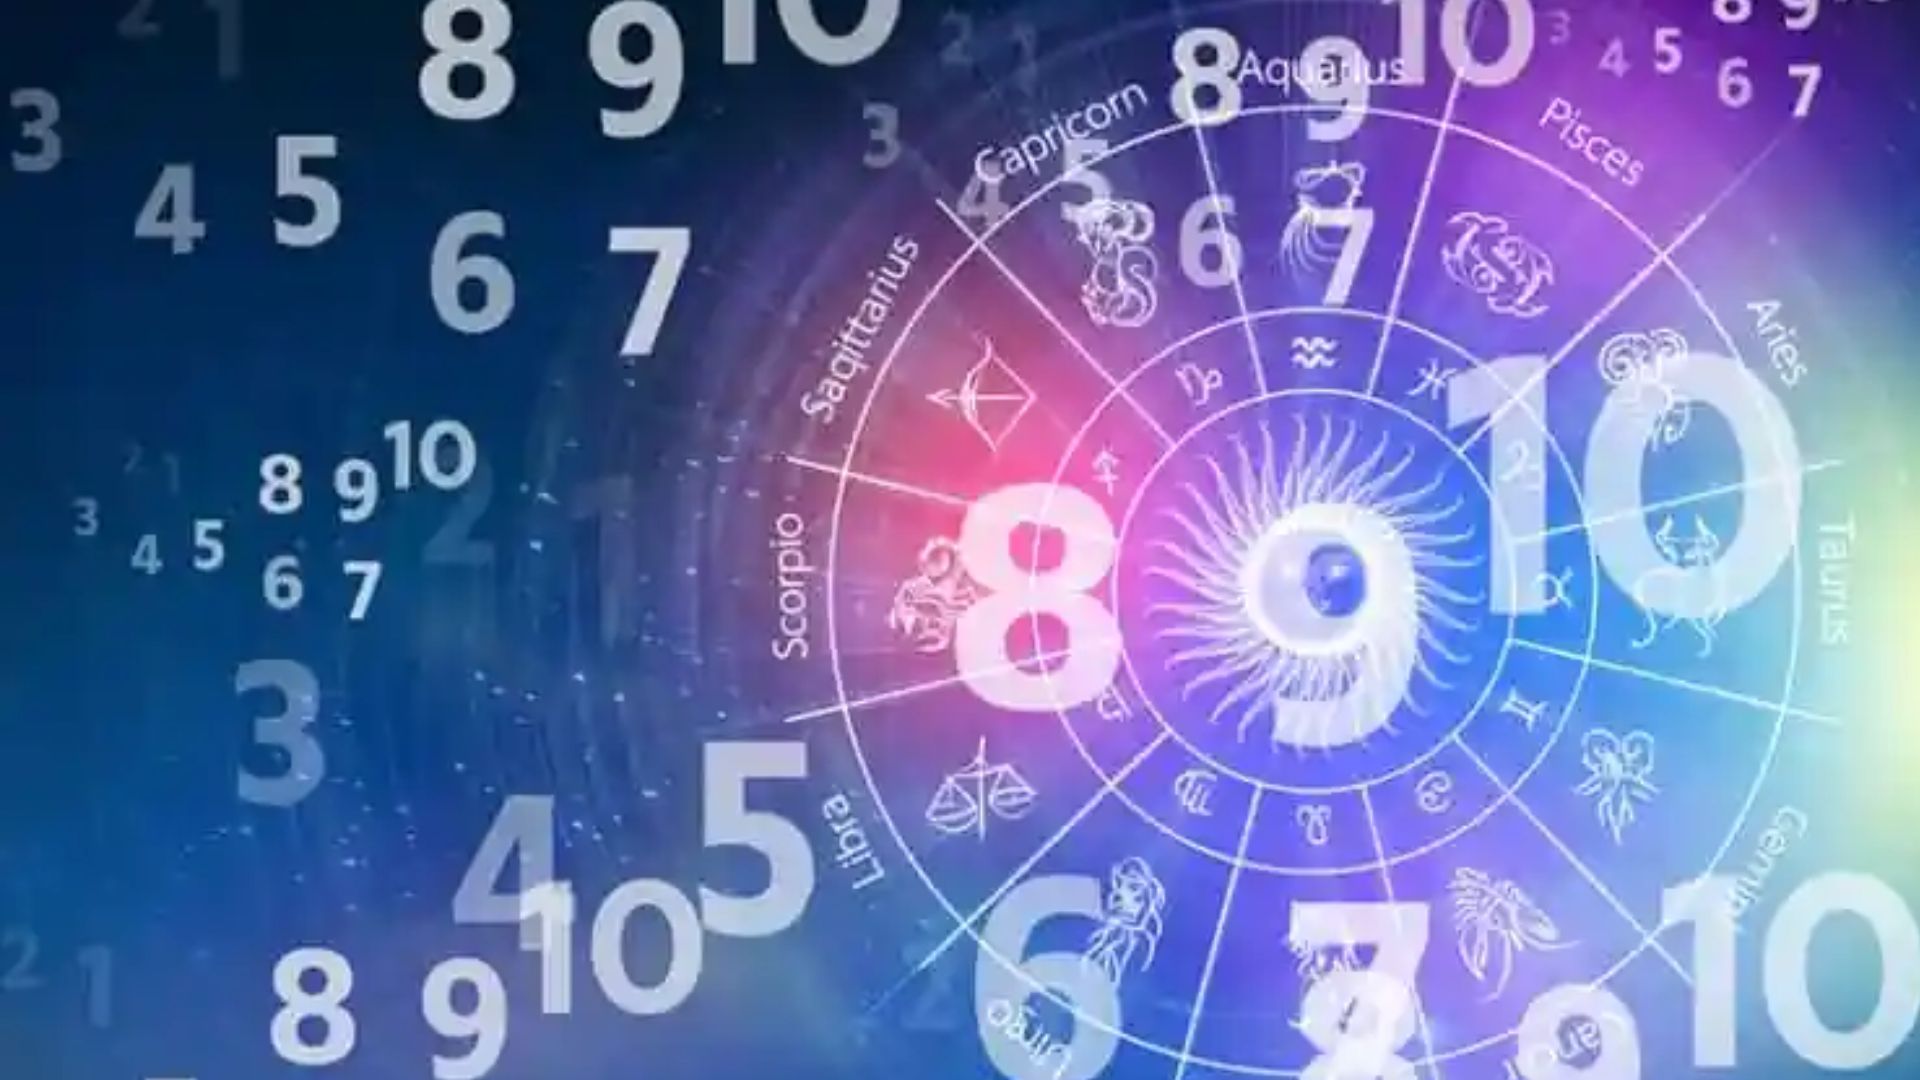 Numbers and a circle chart of zodiac signs